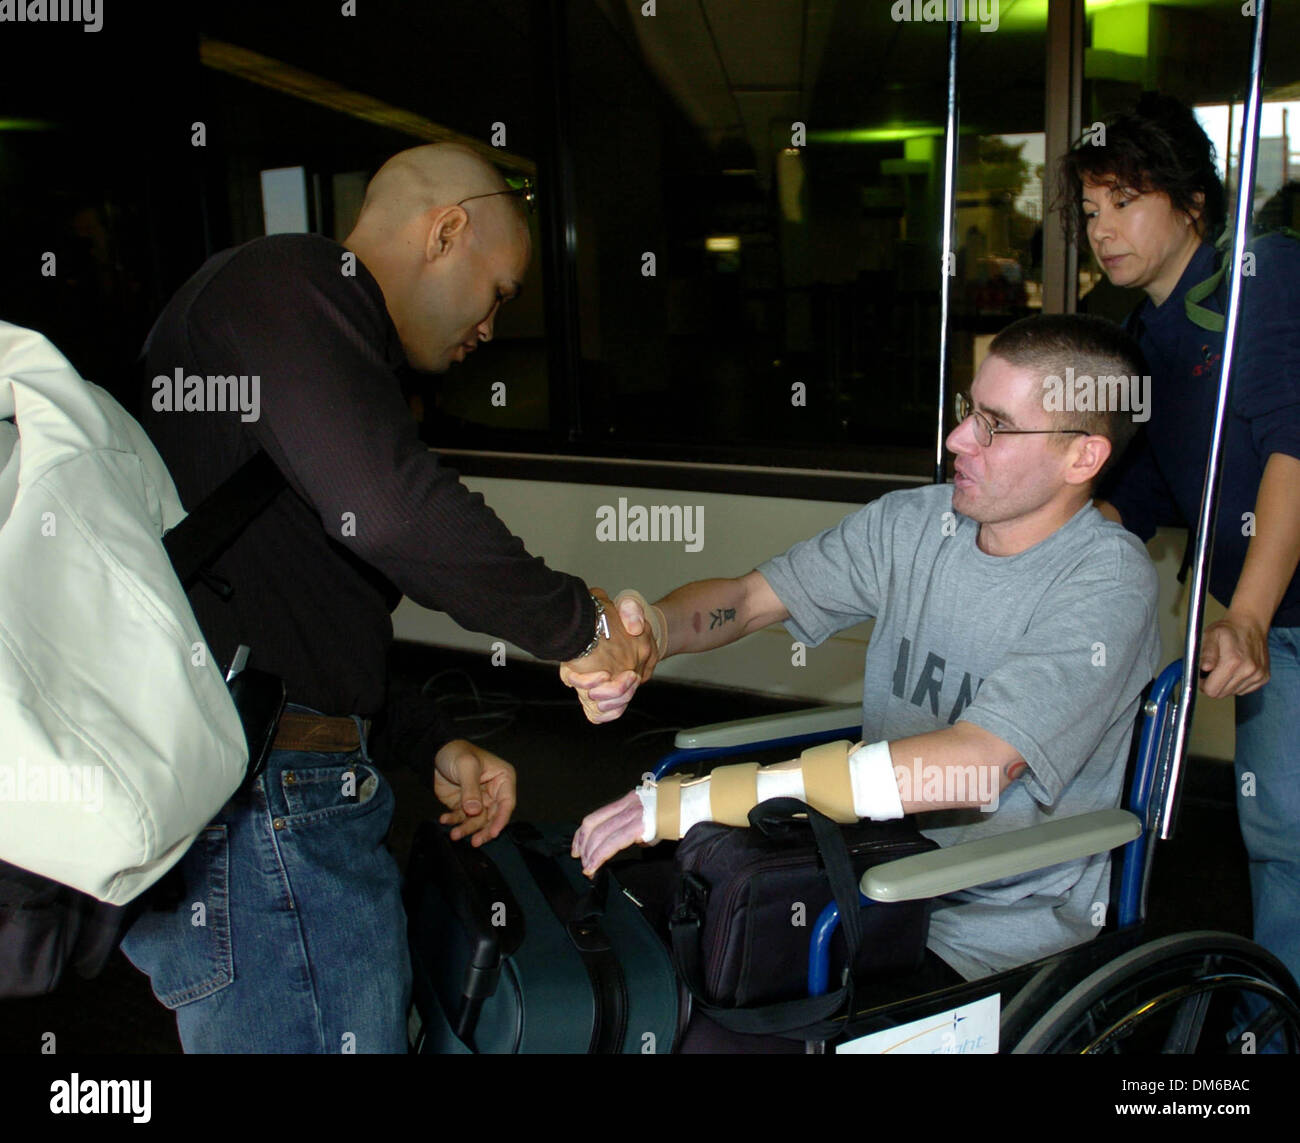 Jan 25, 2005; San Antonio , TX, USA; San Antonio boxer JESSE JAMES LEIJA greets U.S. Army Spc. SEAN BEVERIDGE, who was wounded in a suicide bombing in Iraq, at San Antonio International Airport on Tuesday, Jan. 25, 2005. Leija was on his way to Atlantic City, where he will face Arturo Gatti in a championship match. Beveridge was on his way home to Duvall, Wash. Stock Photo